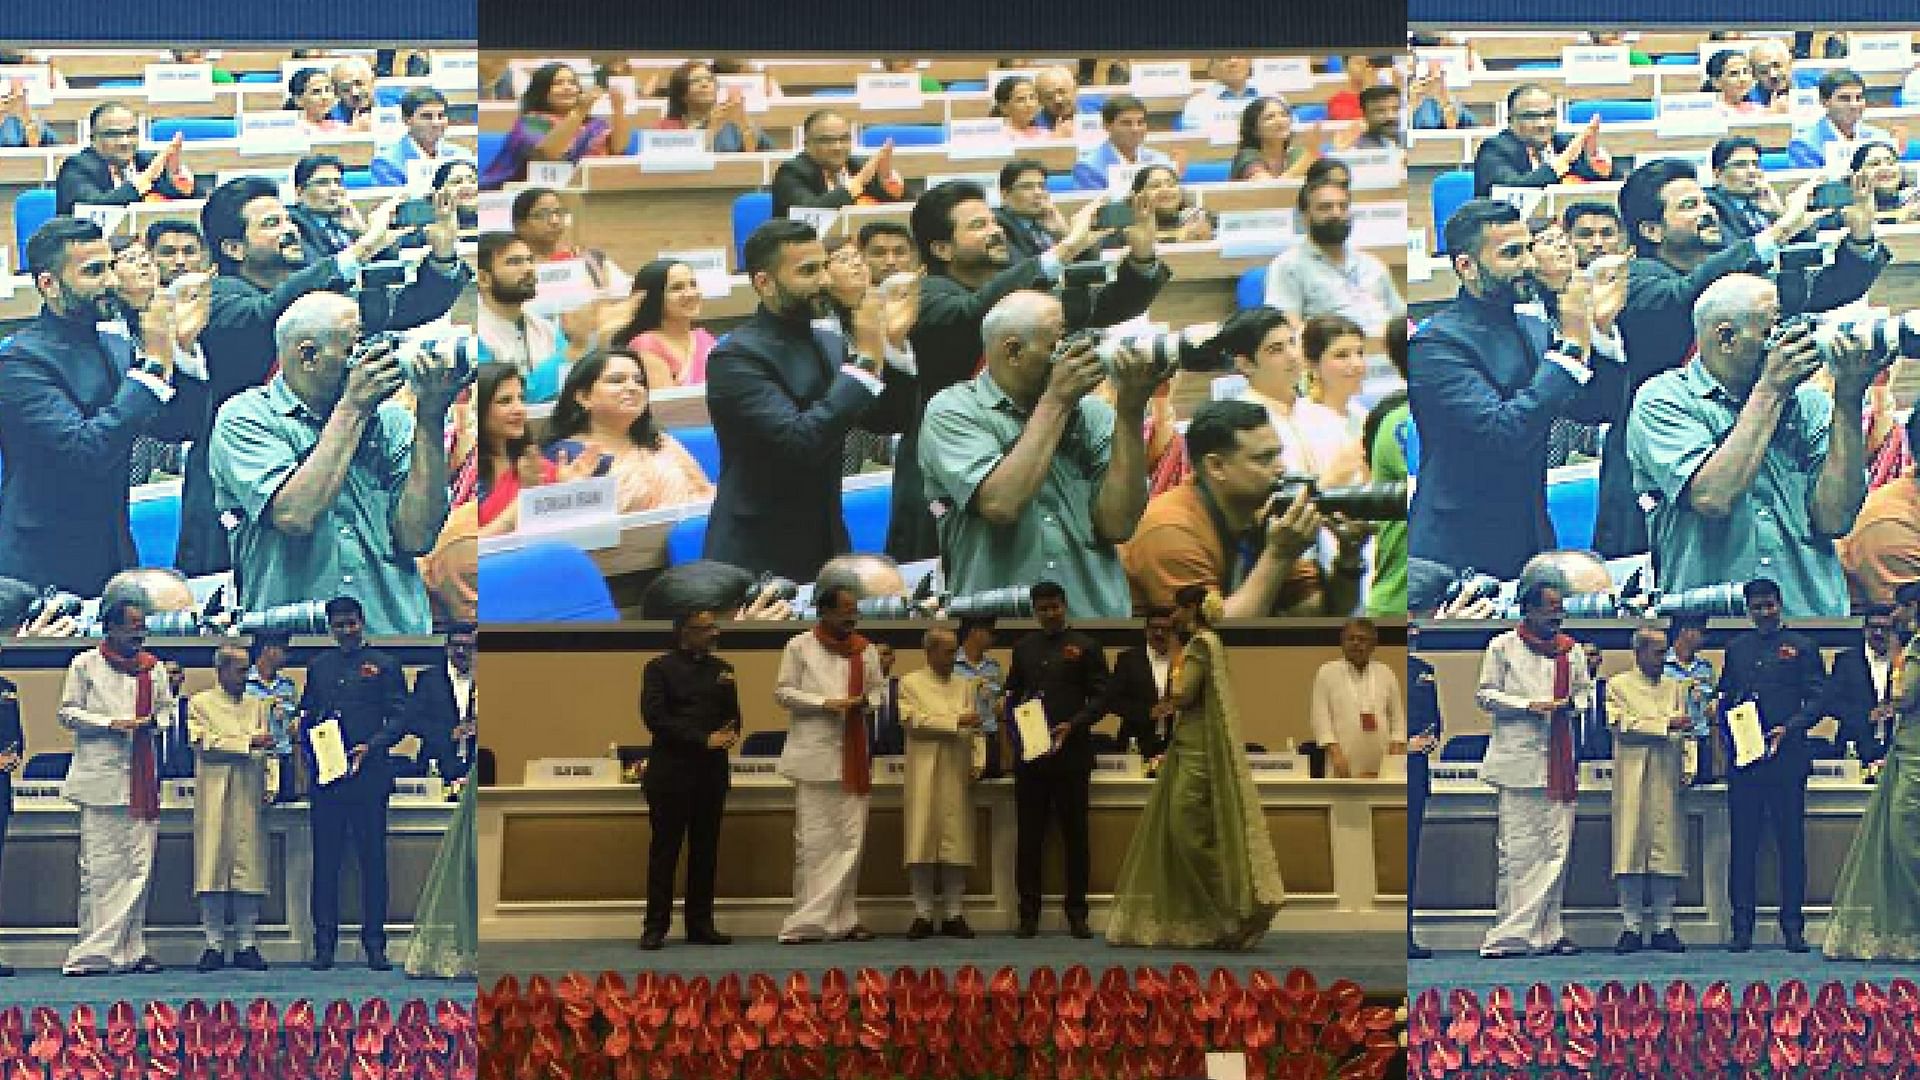 

Anil Kapoor takes pictures as Sonam receives her award. (Photo courtesy: <a href="https://twitter.com/AnilKapoor/status/859789136911245312">Twitter/ anilkapoor</a>)